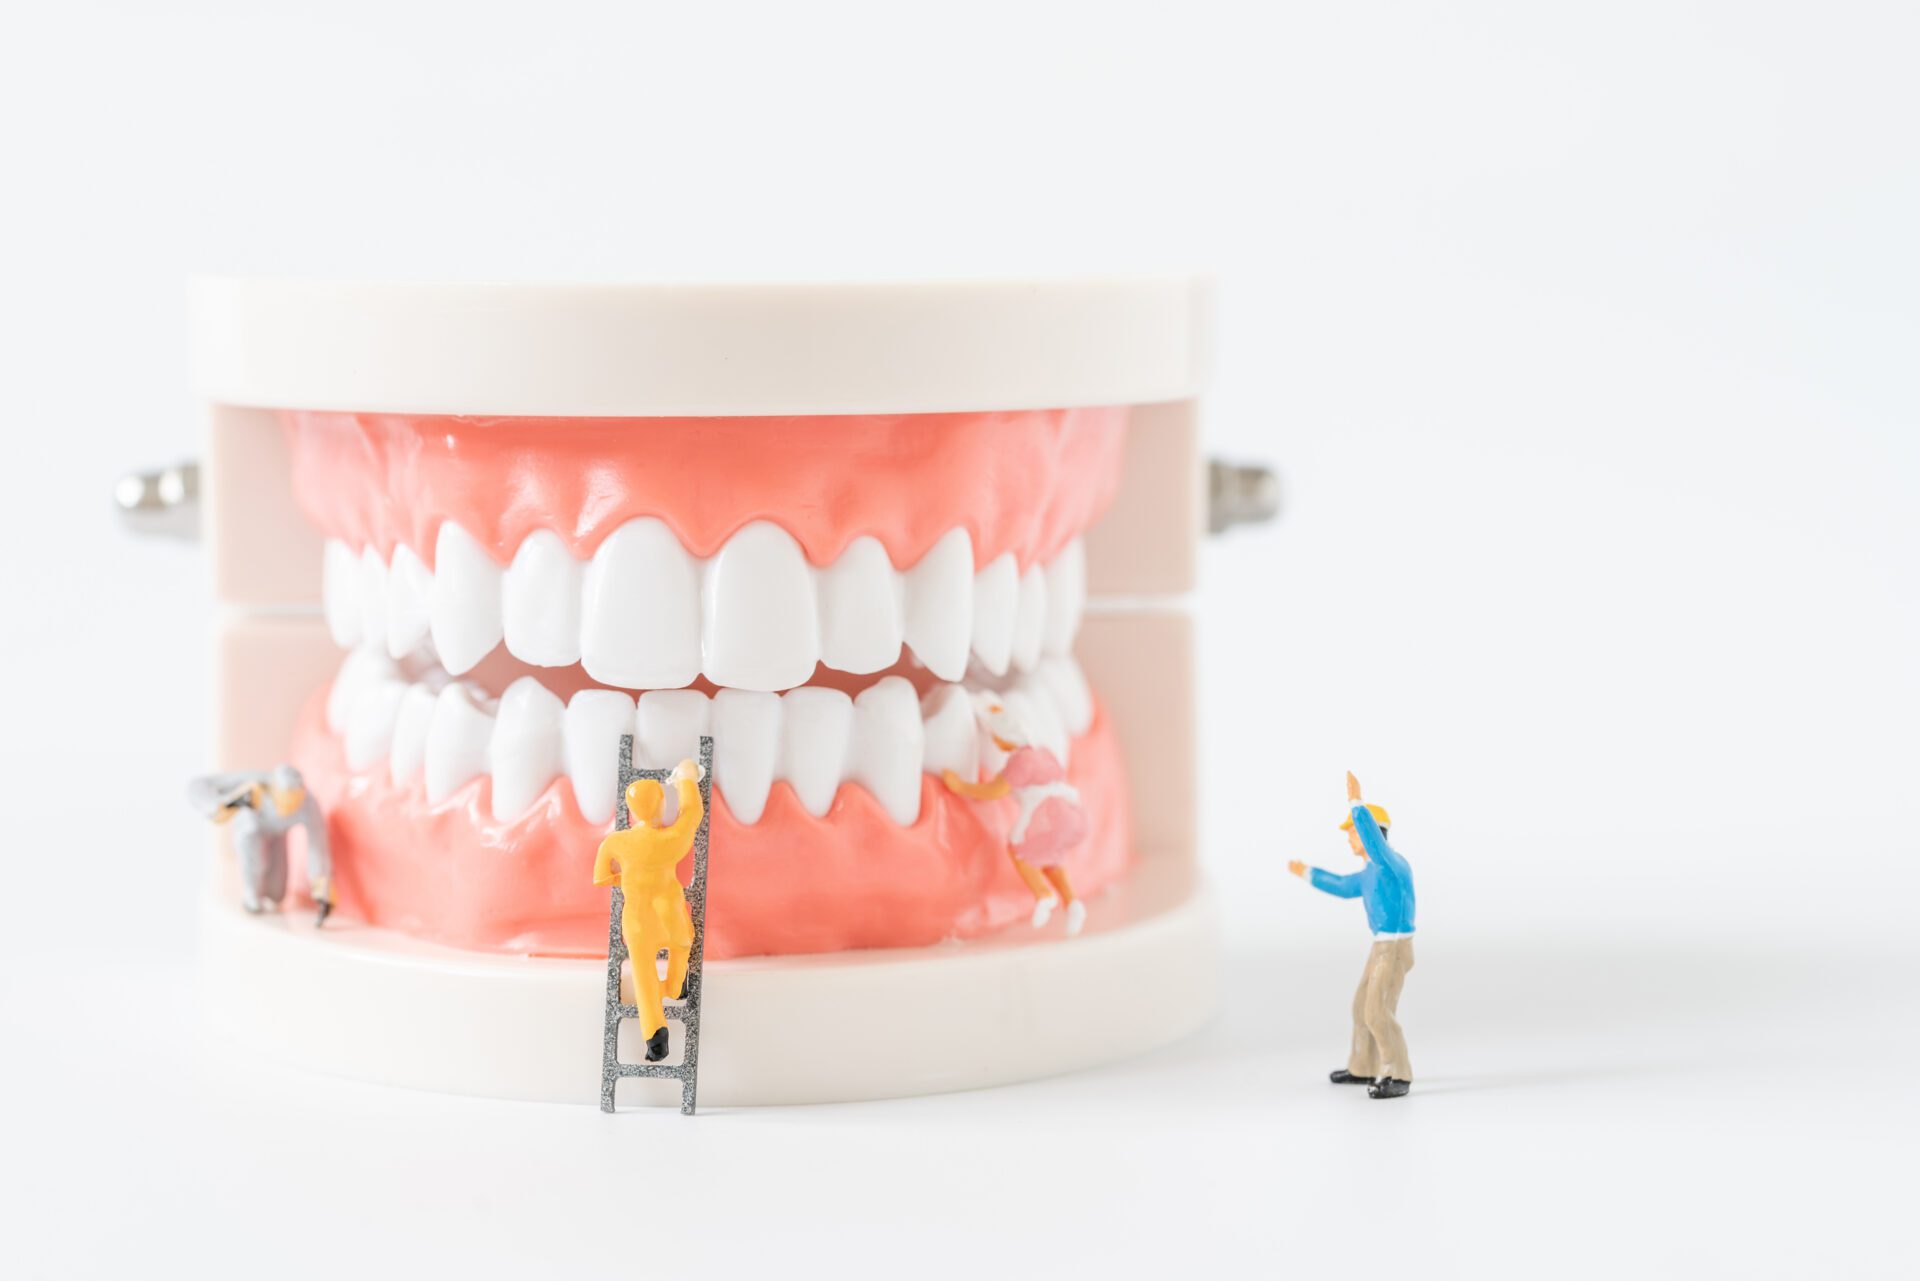 Emergency dental care in Huntsville, AL including tooth extractions